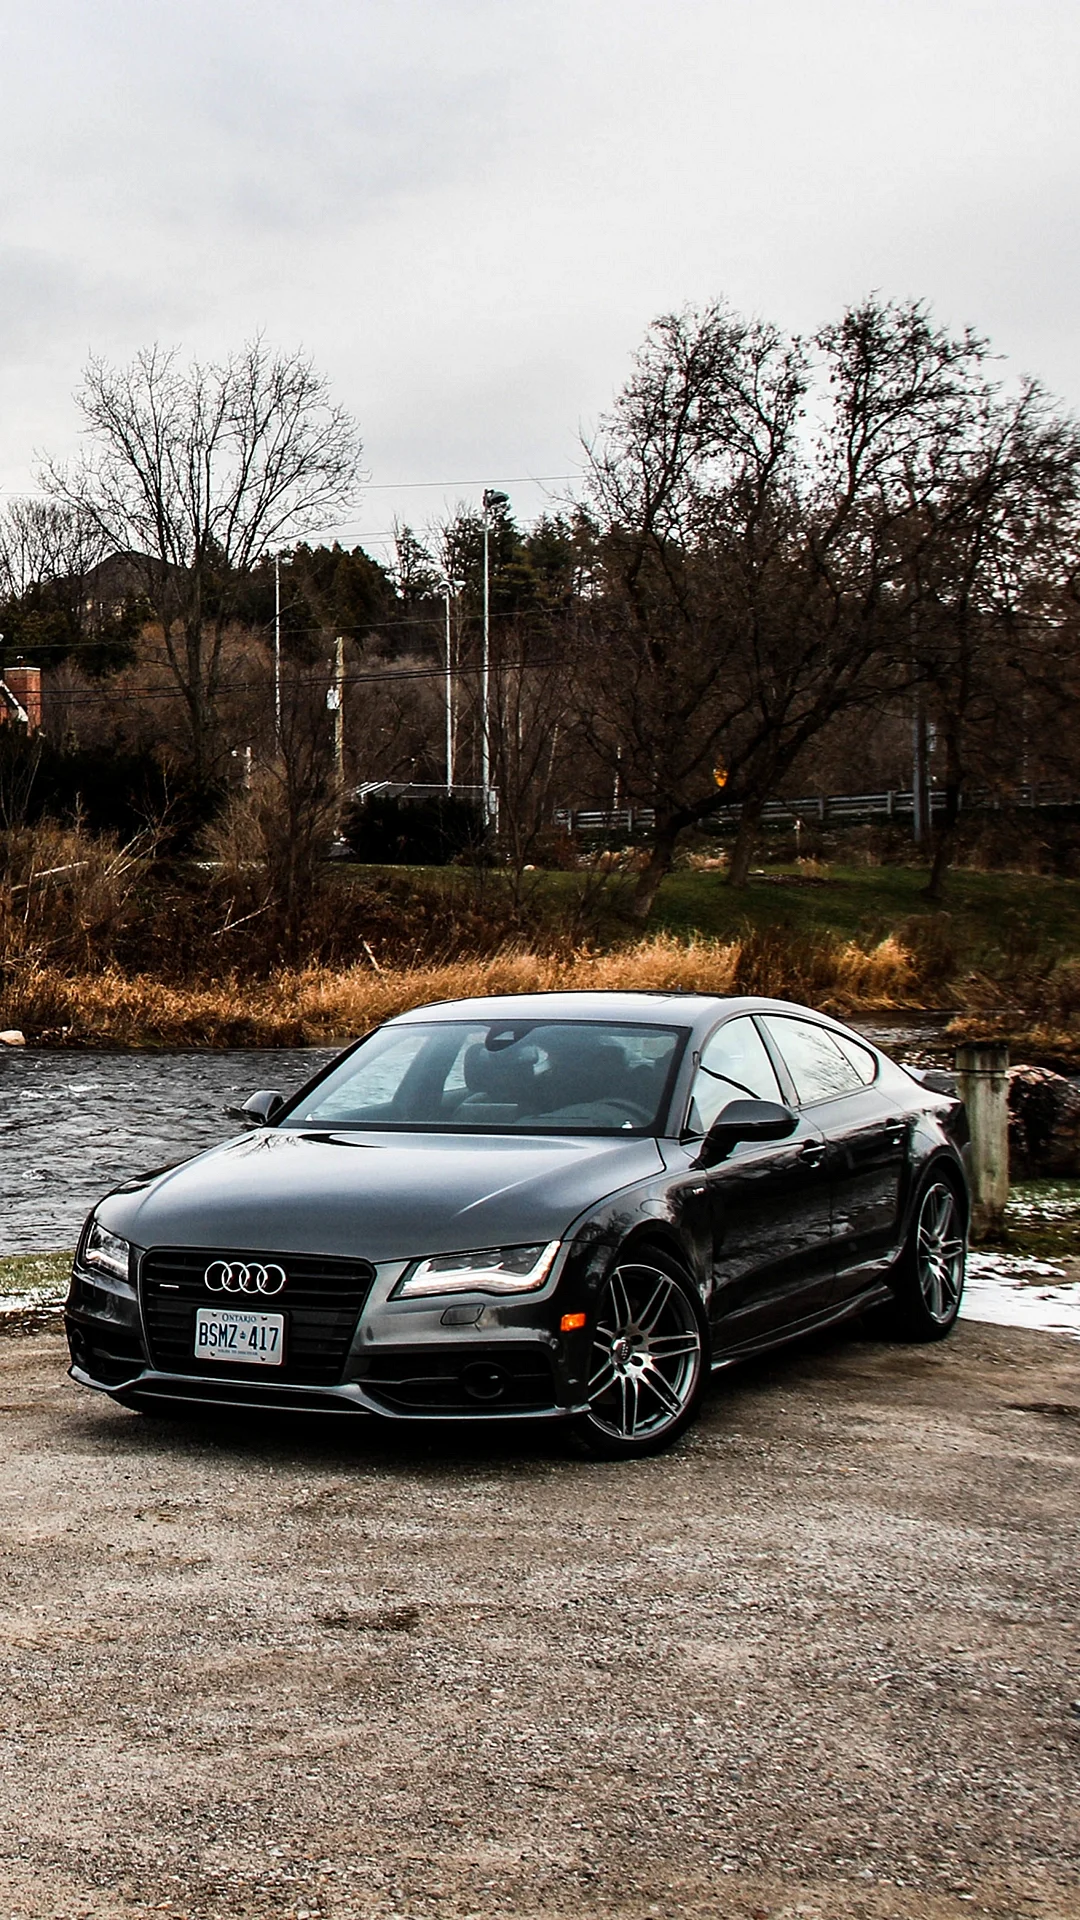 Audi Rs7 Wallpaper For iPhone